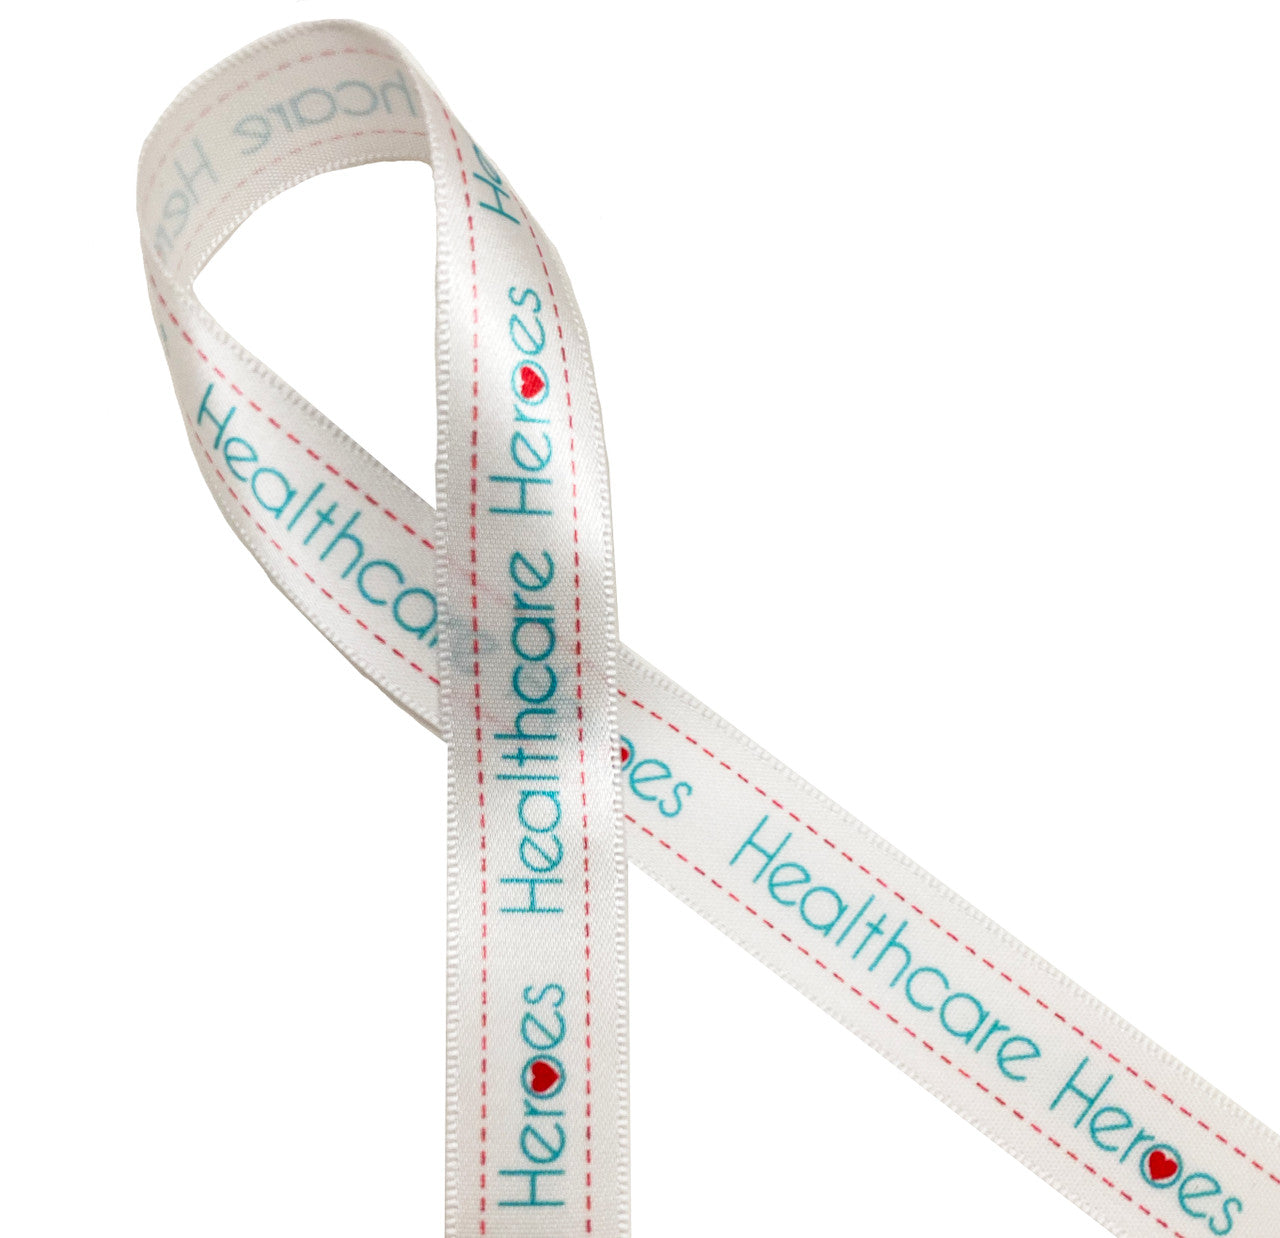 Healthcare heroes in light blue with a red heart printed on 5/8" white single face satin ribbon is the ideal ribbon to celebrate your favorite healthcare professional!